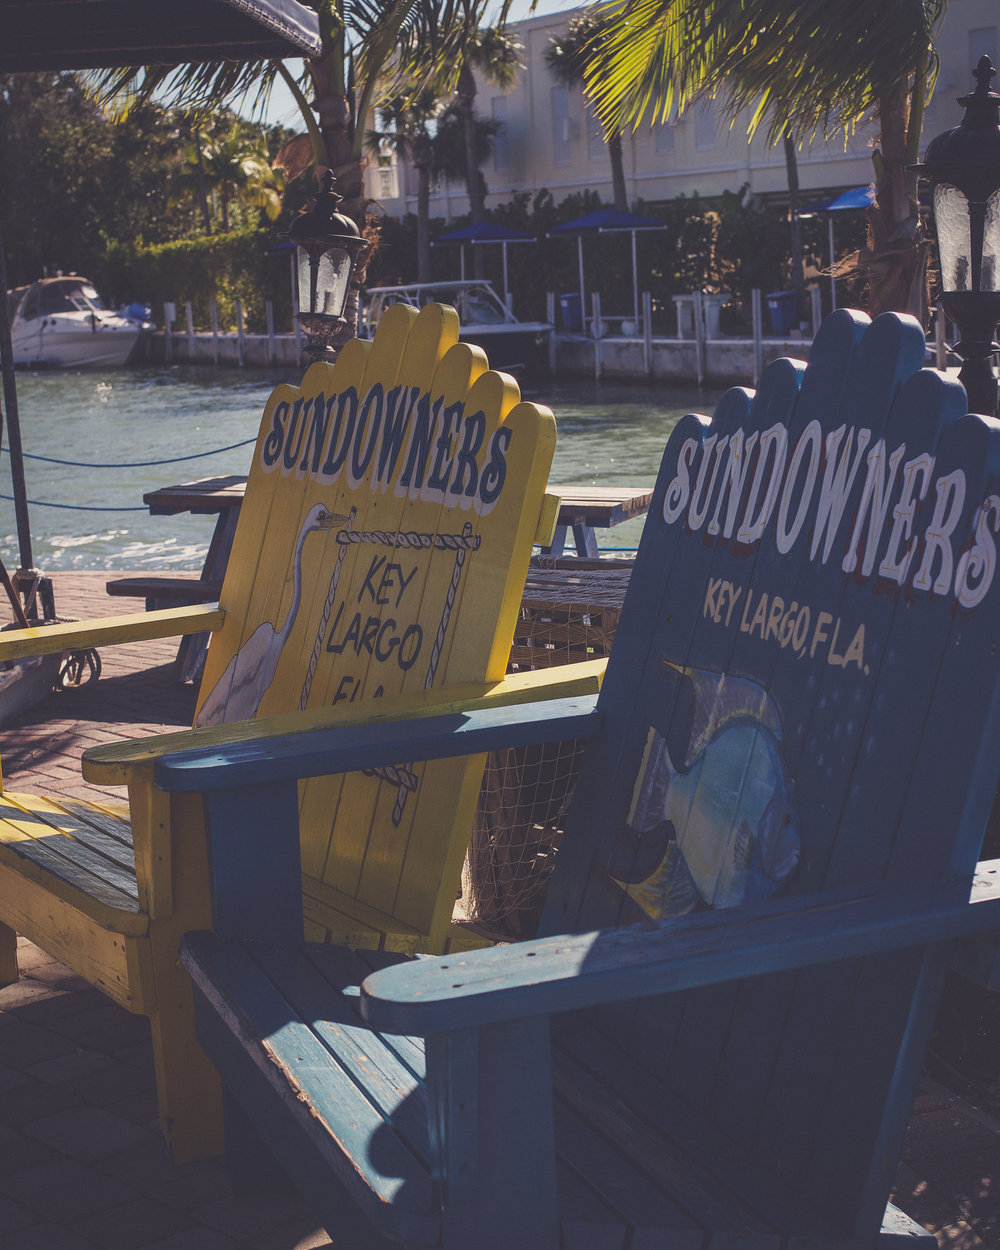 Oversized Adirondack chairs are the perfect photo opportunities